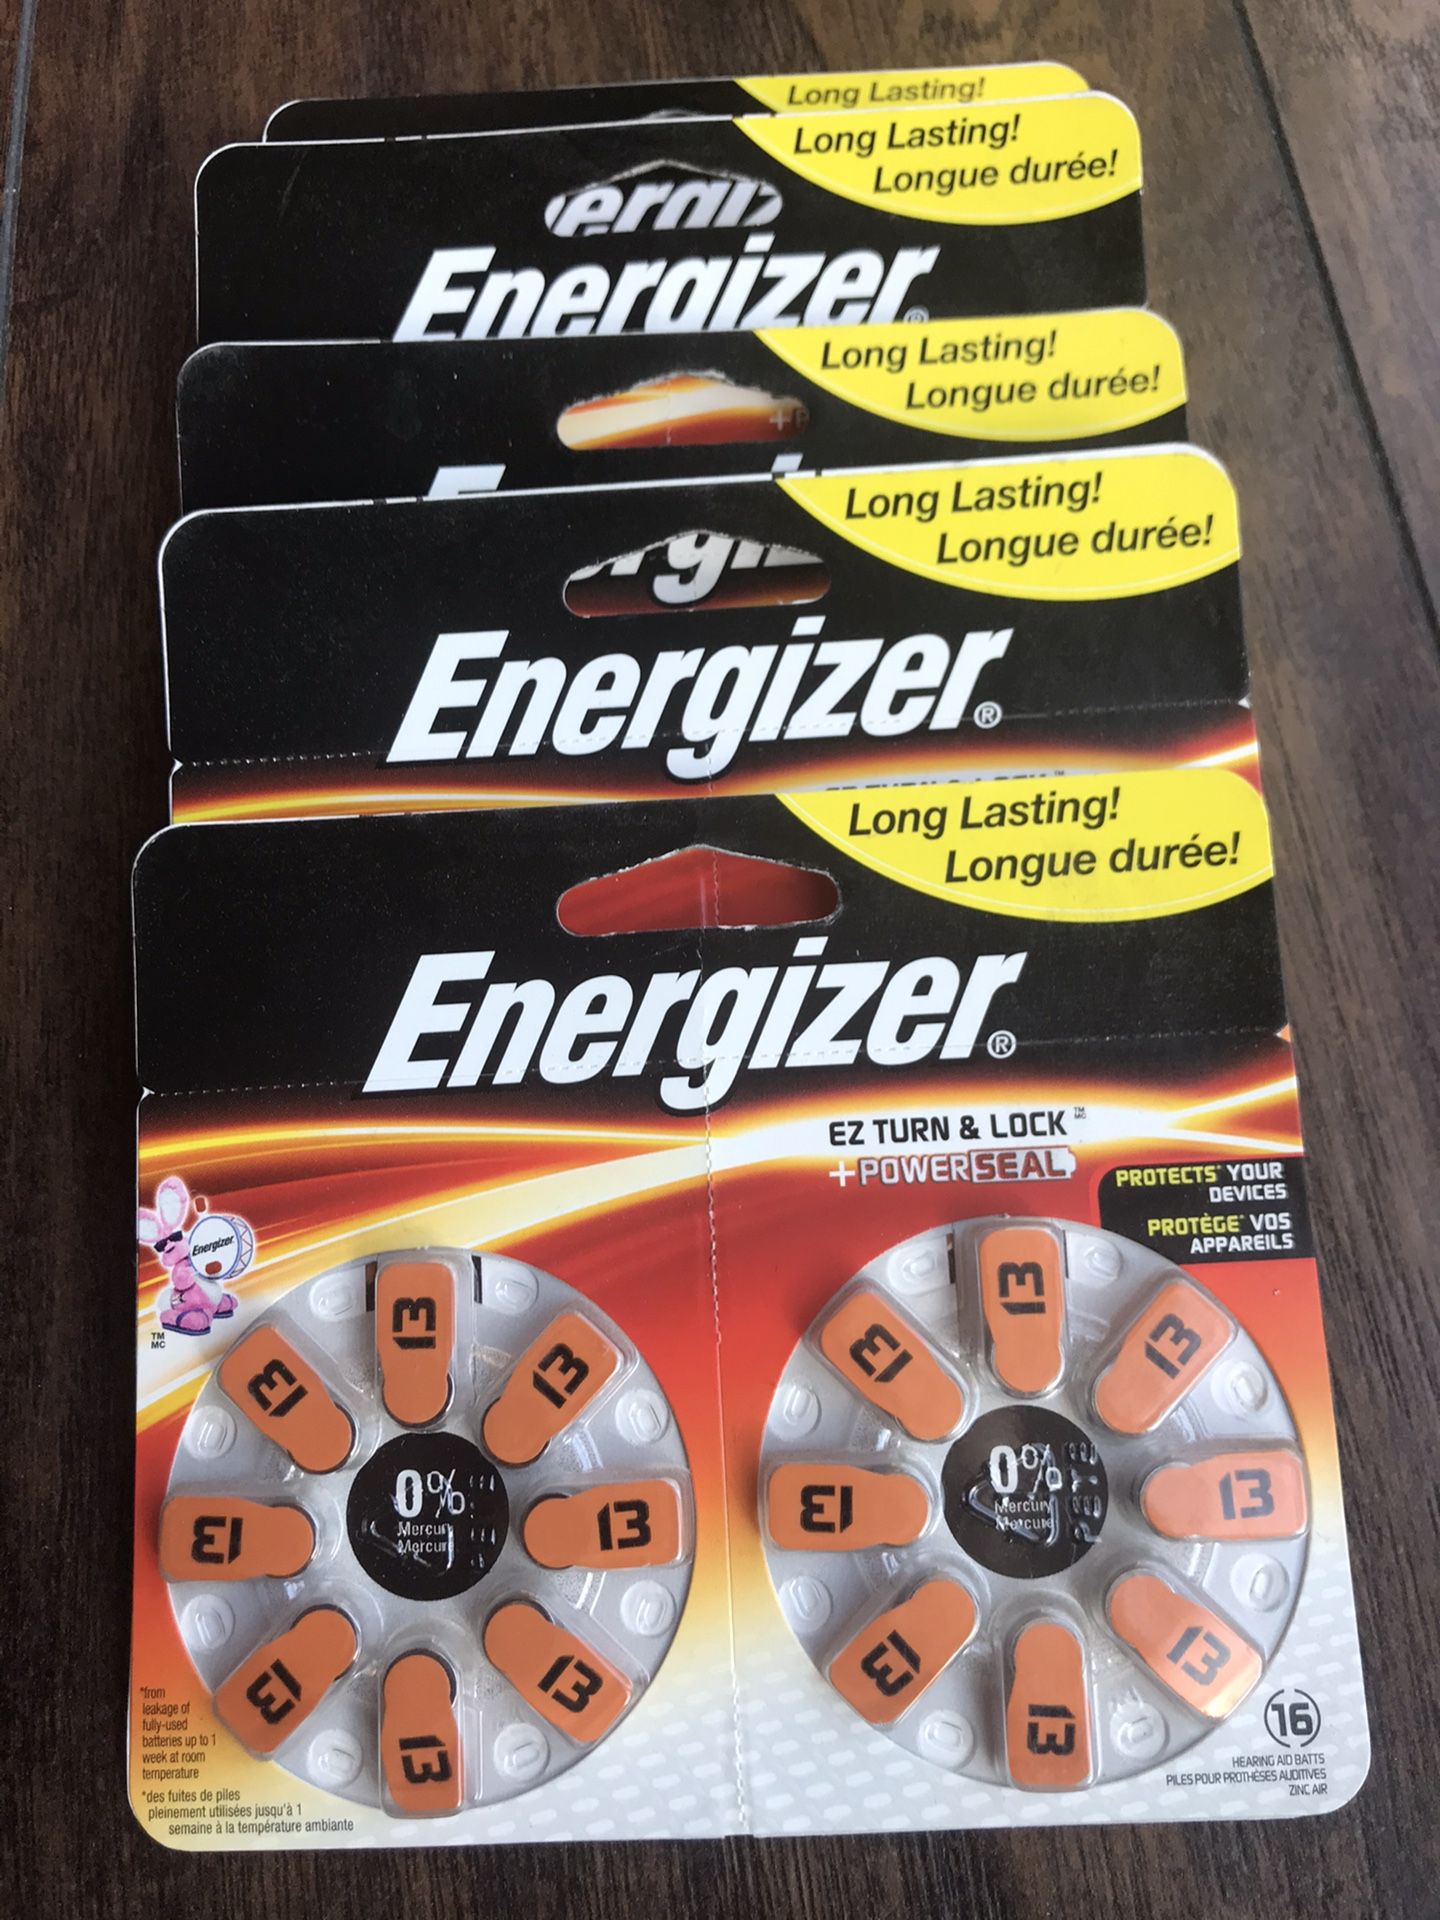 16 PACK ENERGIZER EZ Turn & Lock Powerseal Size 13 Hearing Aid Batteries Lot of 5. Brand New. Never Used. Never Opened. Long Lasting. Great Deal.